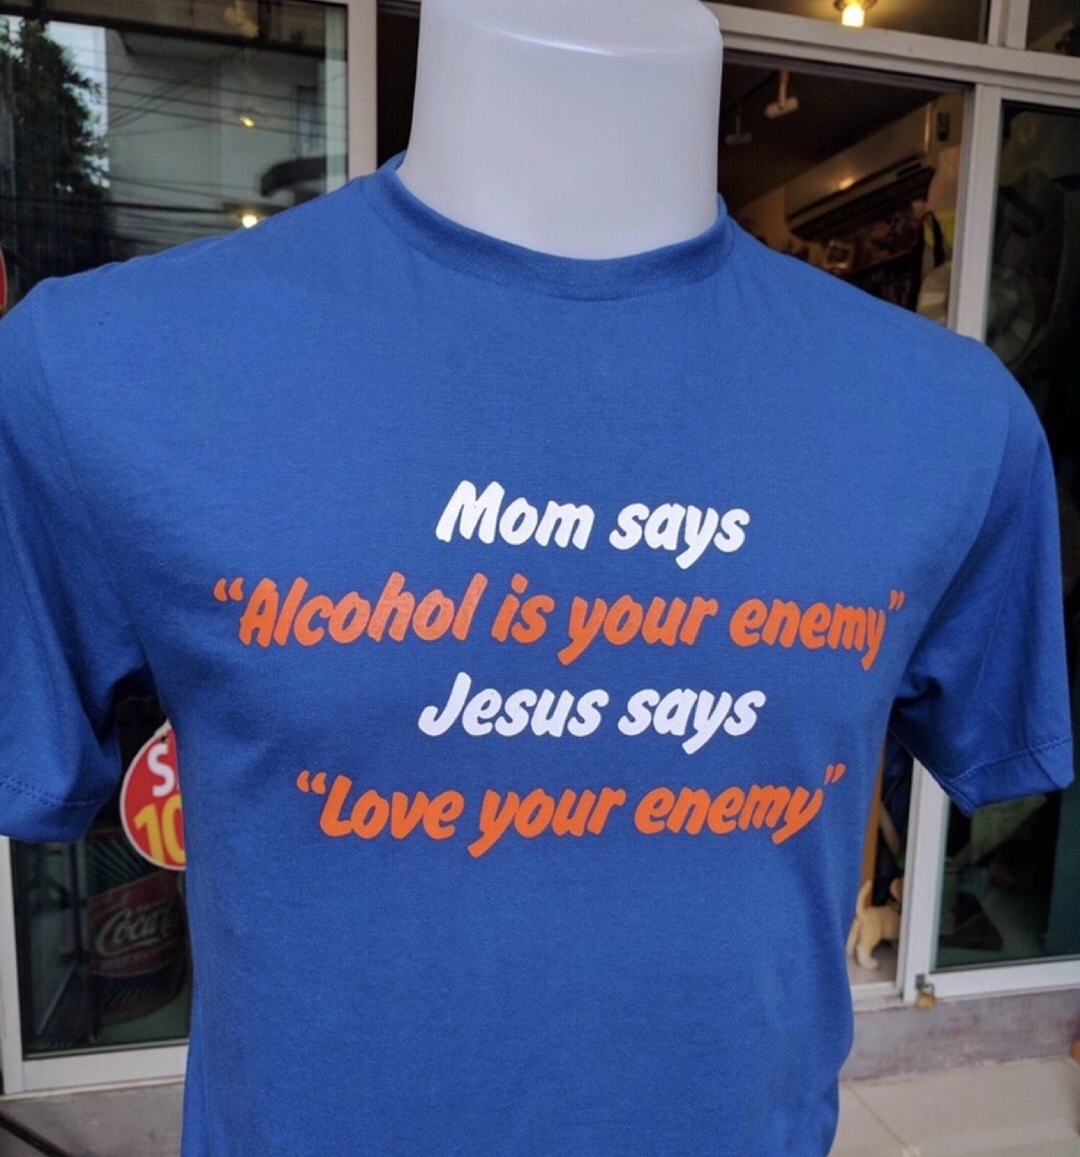 memes - t shirt - Mom says Alcohol is your enemy" Jesus says "Love your enemy